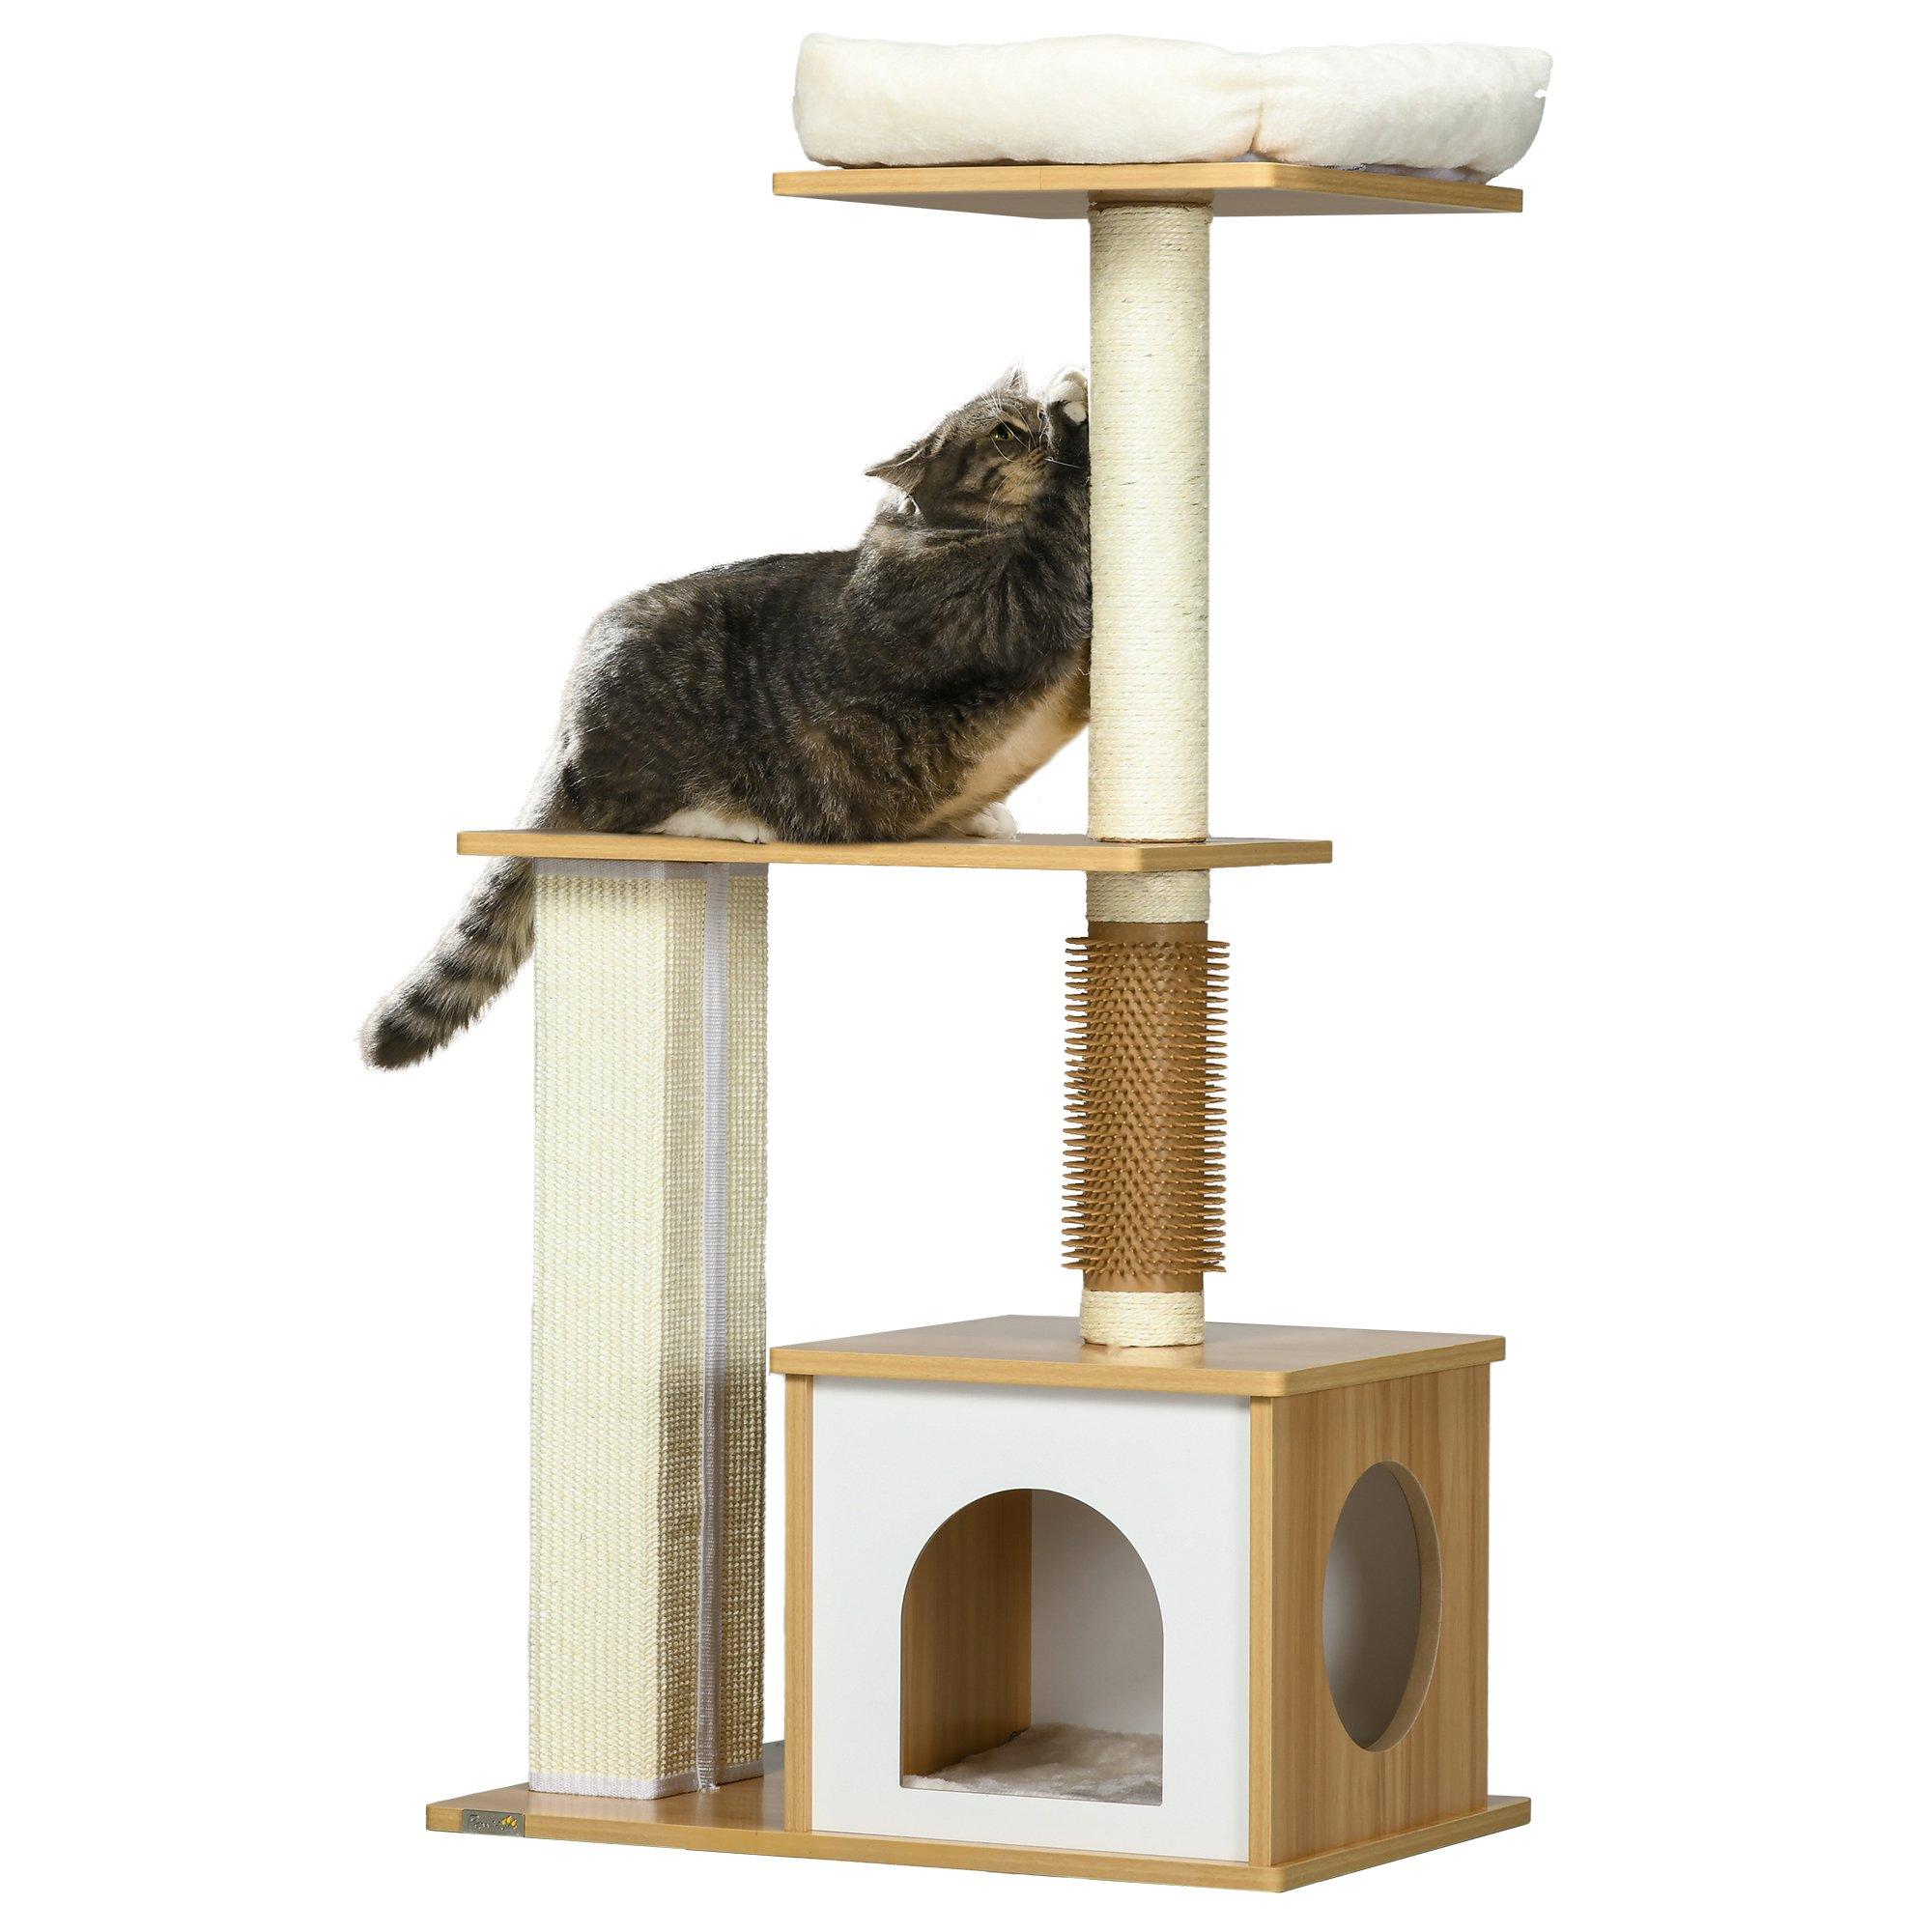 114cm Cat Tree with Scratching Posts, Cat House, Cat Bed, Perches - Oak Tone